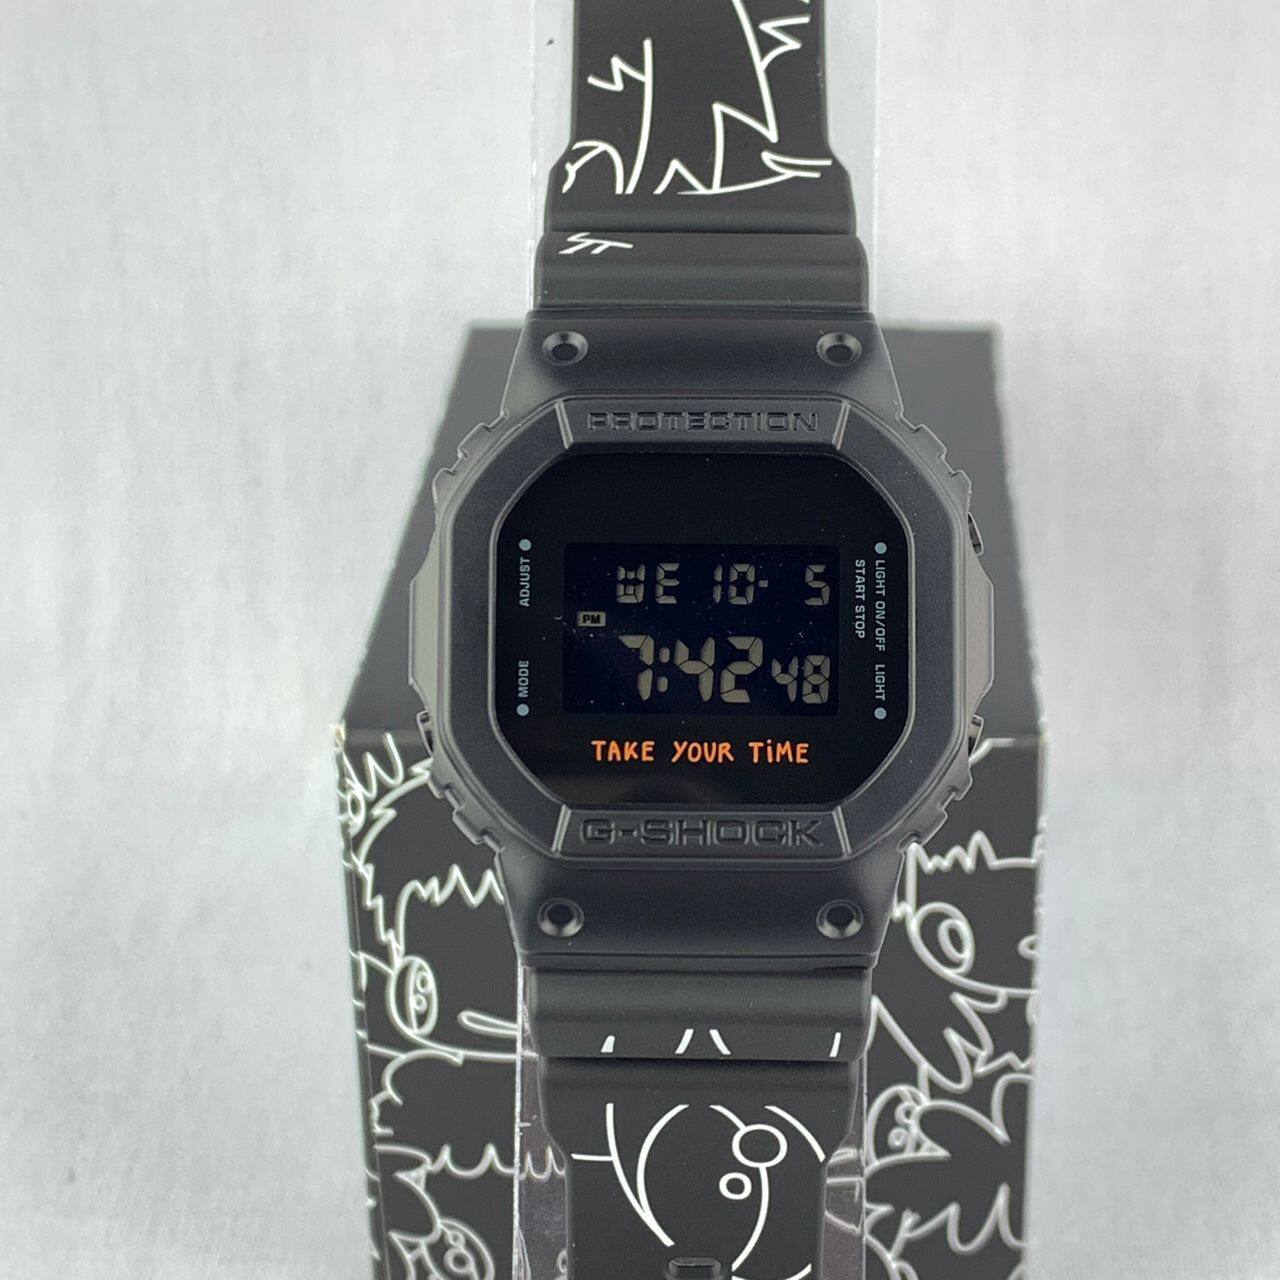 Casio G-SHOCK X Javier Calleja “Take Your Time” Limited Edition DW